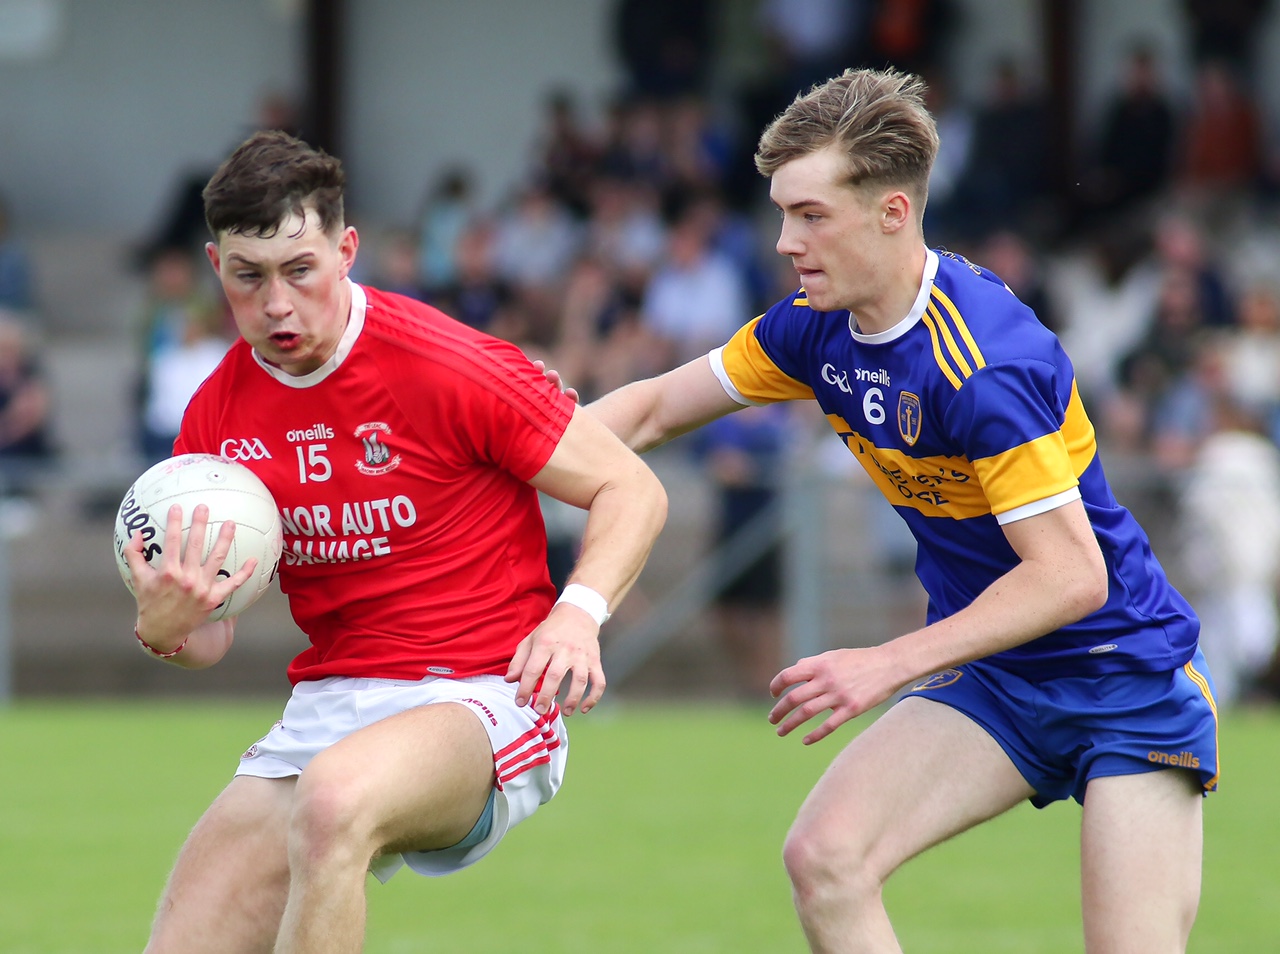 Start dates confirmed for All County Leagues